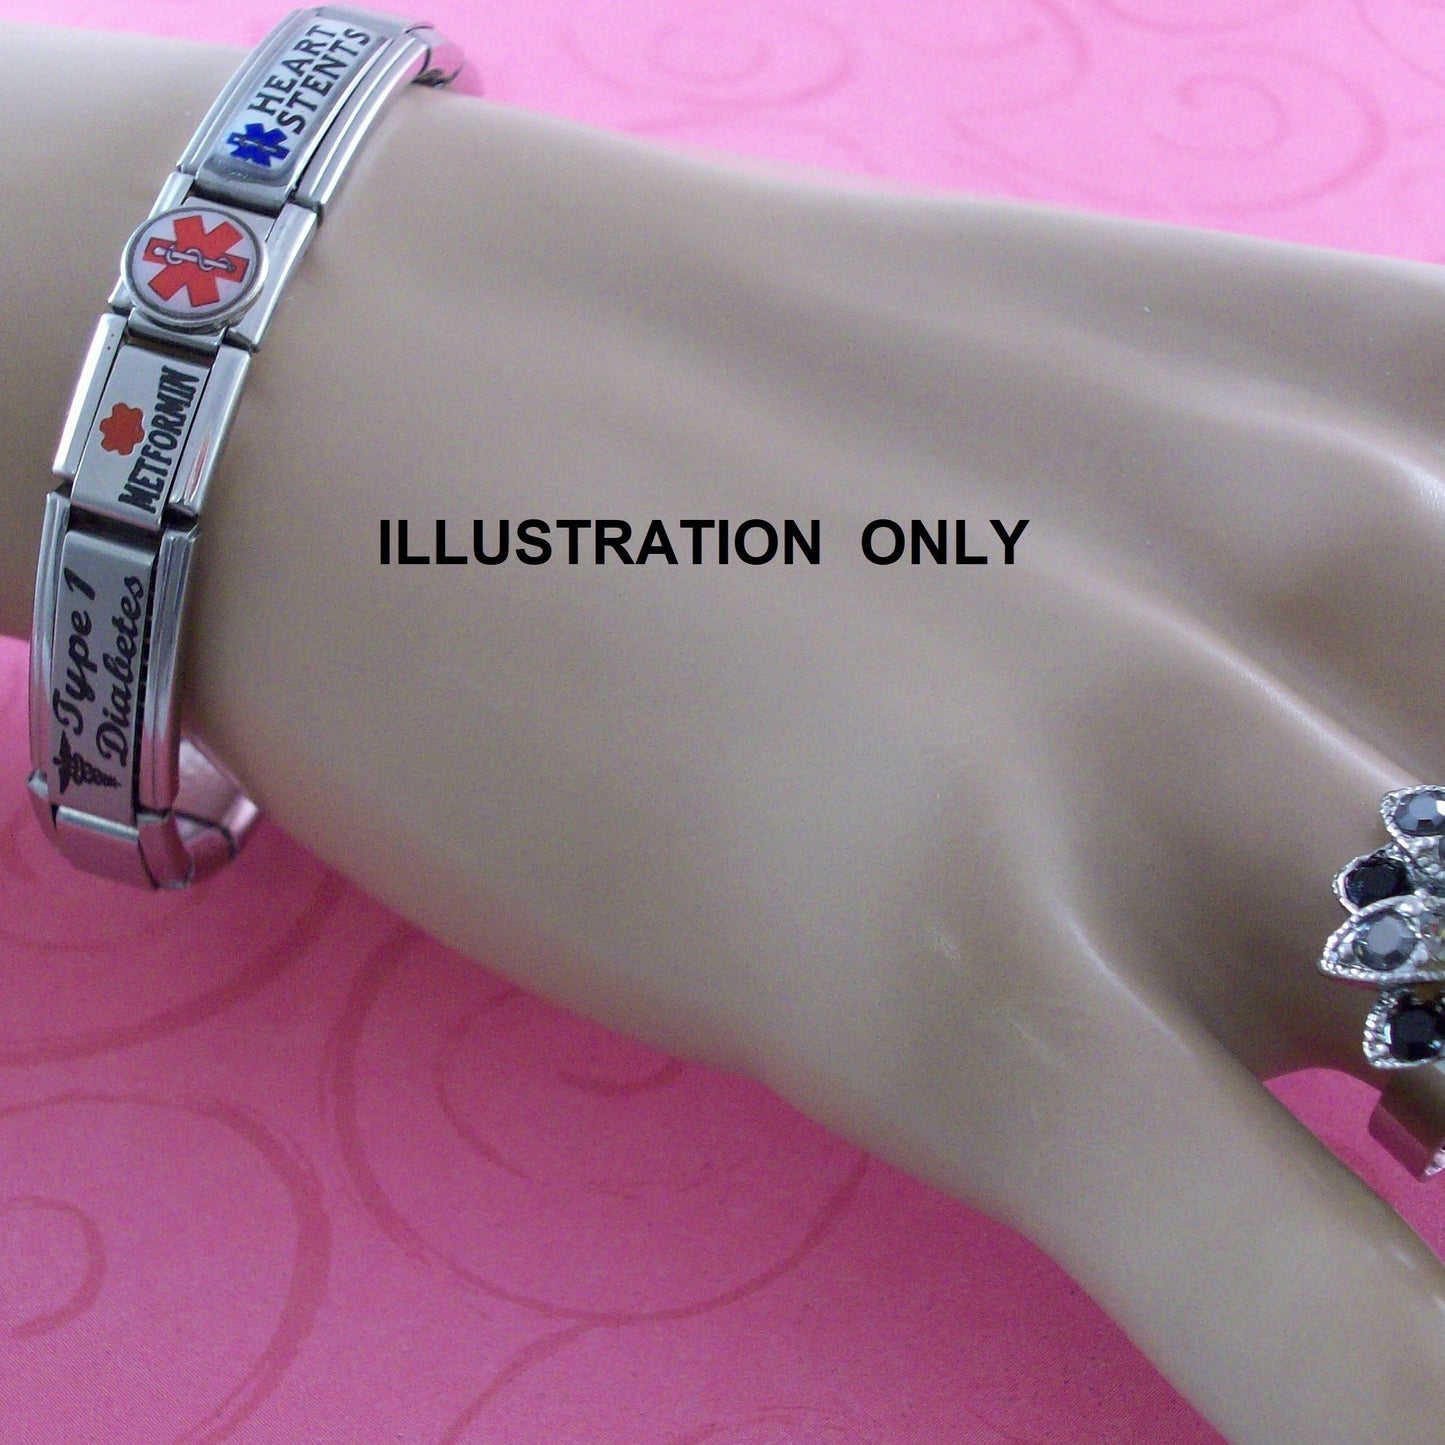 Hip Replacement Medical Bracelet Italian Charm by Gadow Jewelry